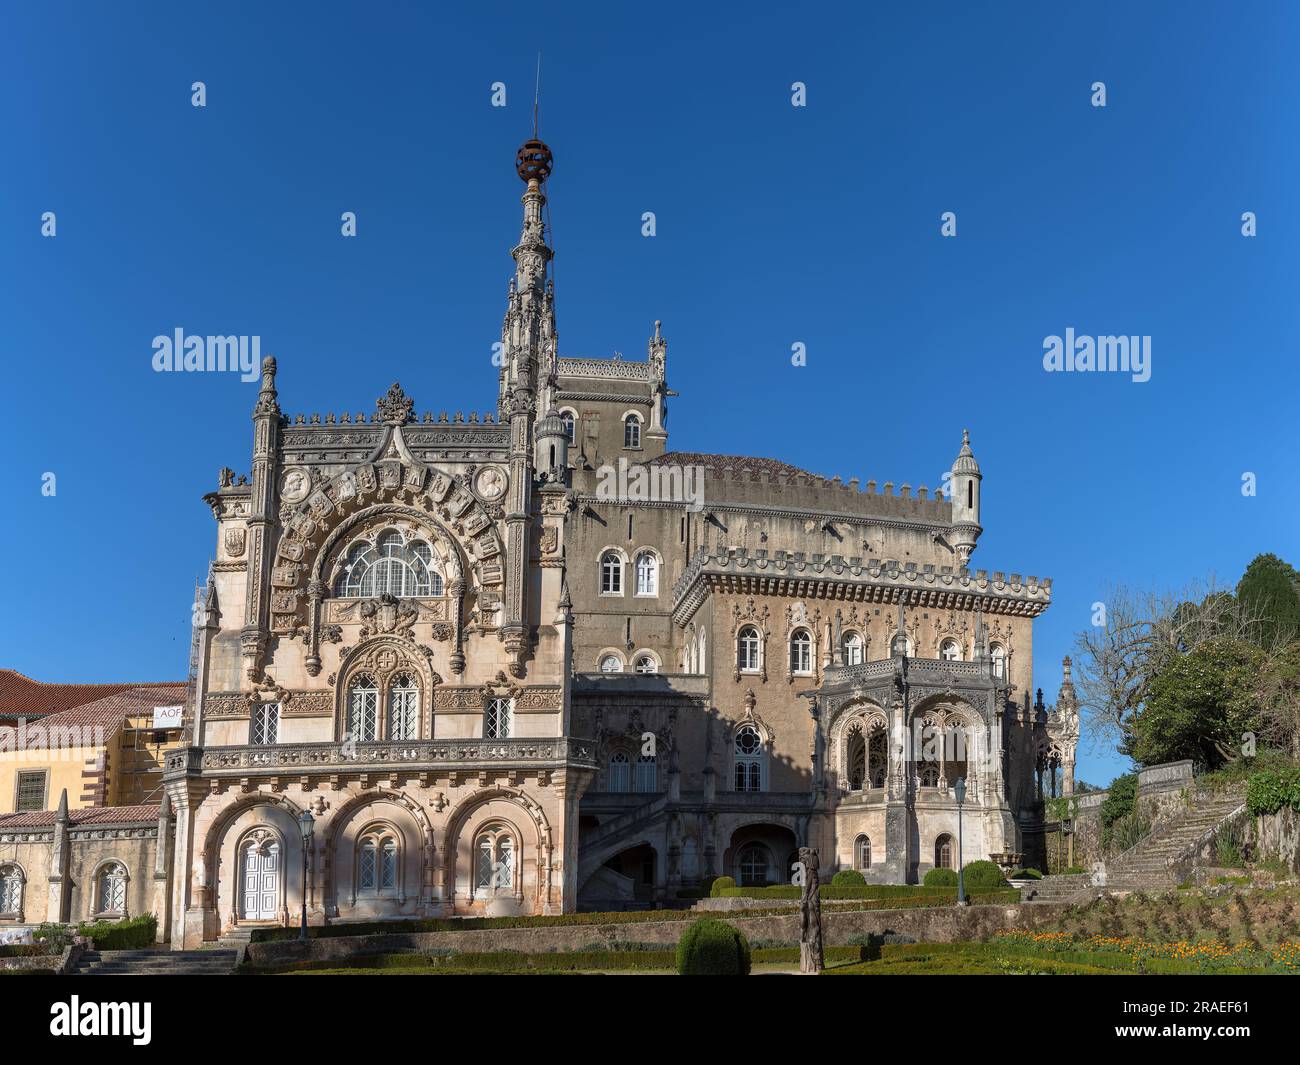 Luso / Aveiro / Portugal - 03 09 2019 : Full view of the back facade of the Bussaco Palace, Romantic palace in Neo-Manueline style monument, romantia« Stock Photo